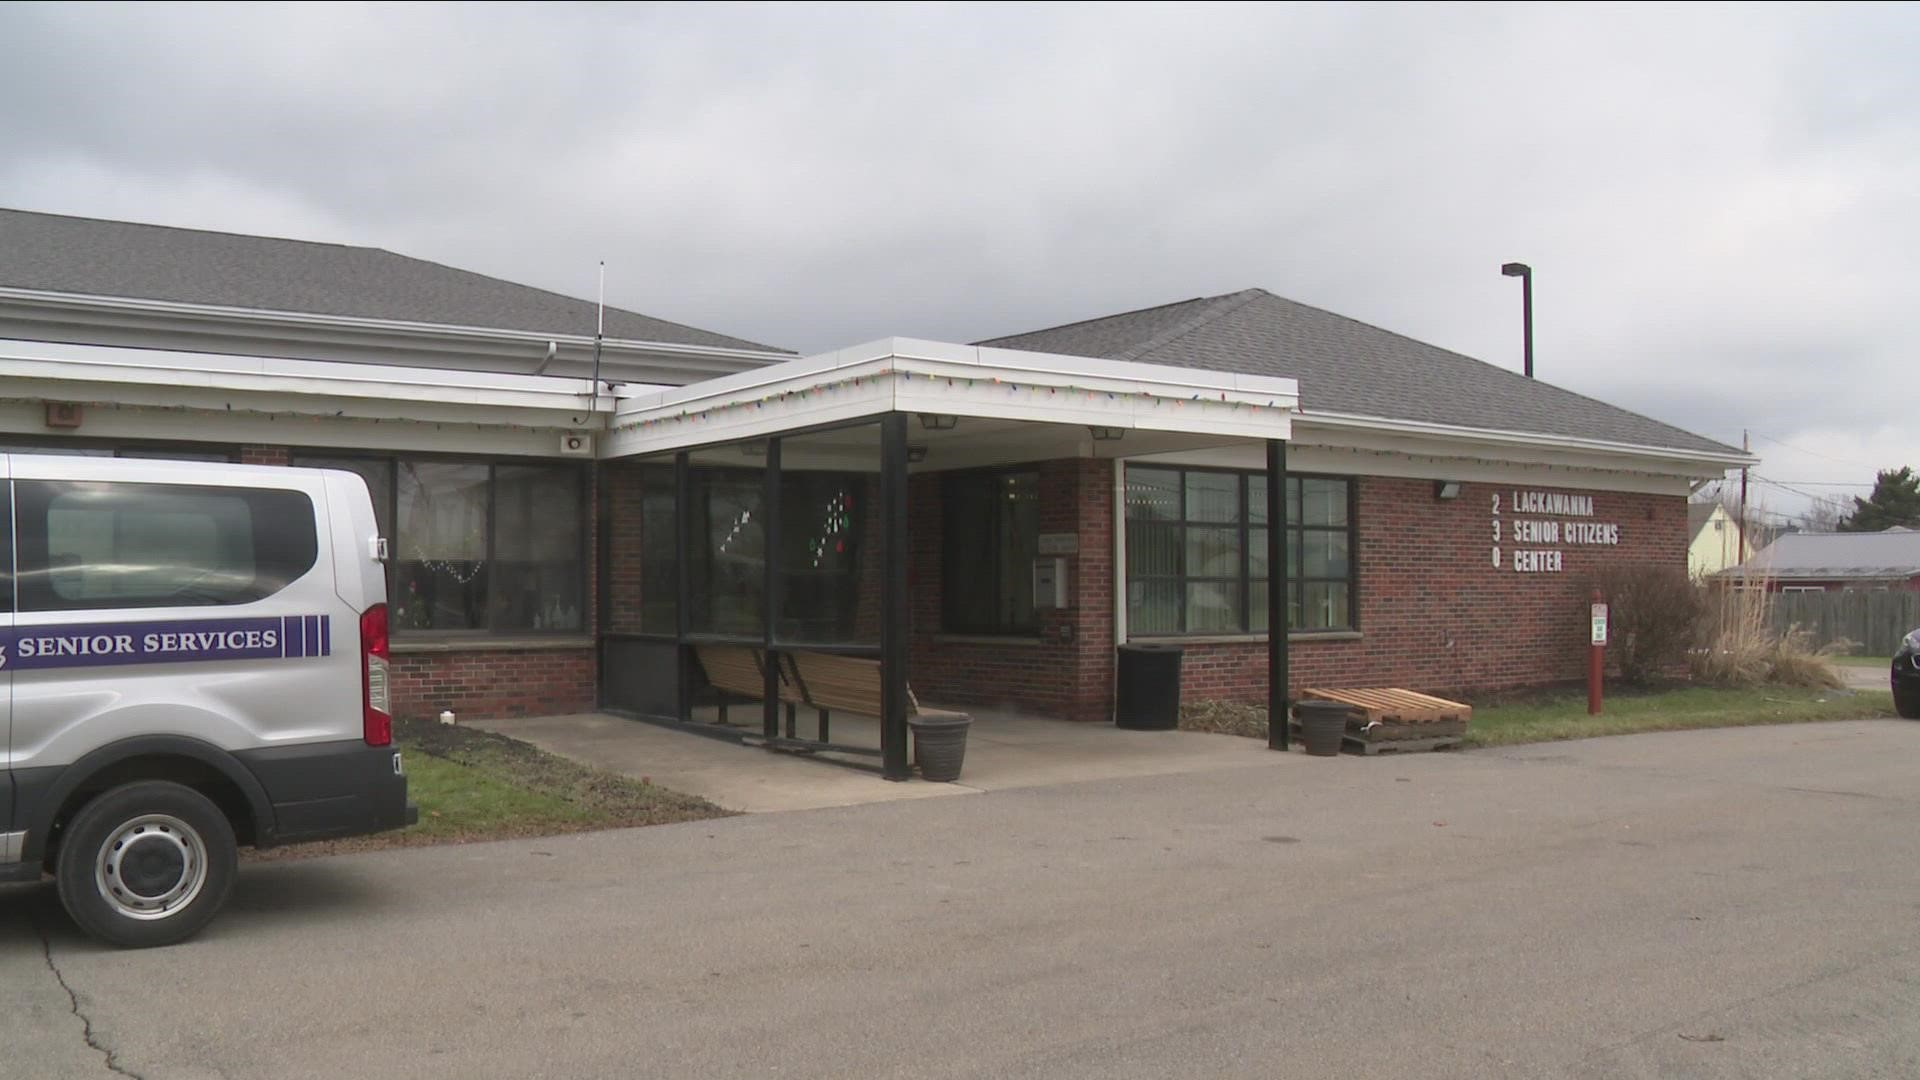 The Lackawanna Senior Center resumed normal operations for the first time since the Blizzard